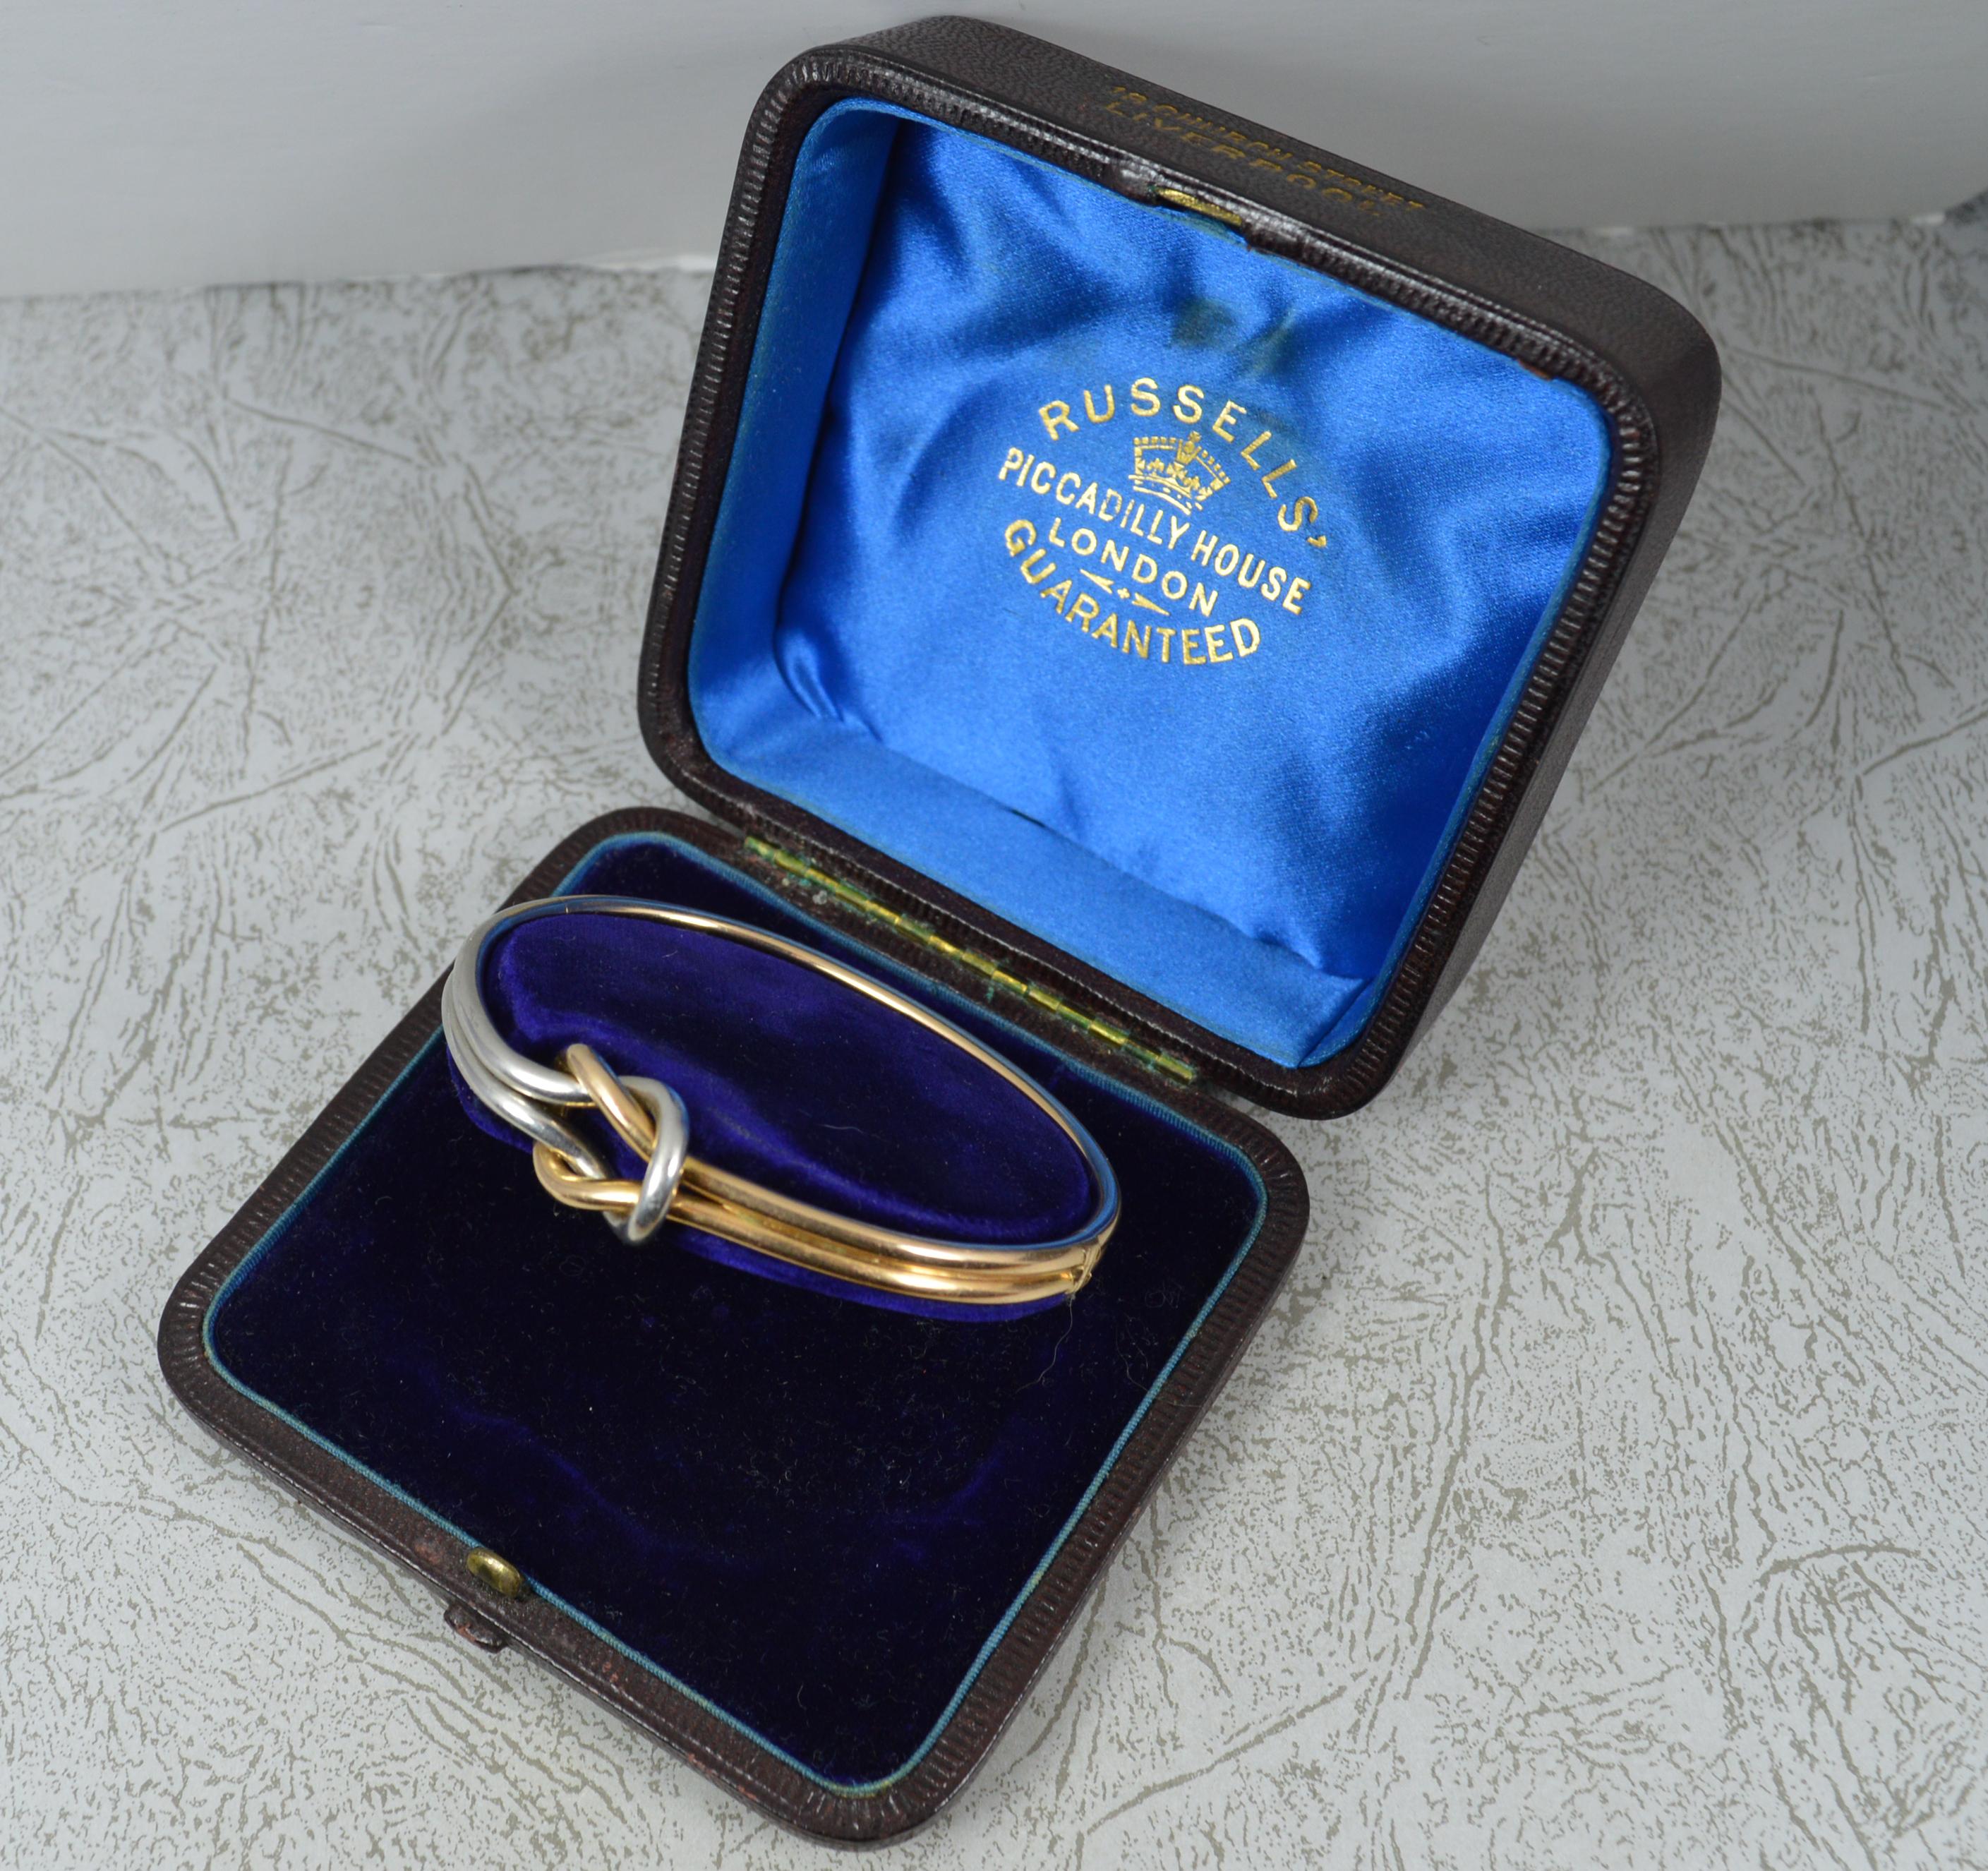 A superb Victorian period bangle. c1860-80
Modelled in a solid 14/5 carat gold bangle throughout with one quarter in platinum.
A double tube design which comes to the centre to create a forever love knot. 
Complete in a Russells leather fitted